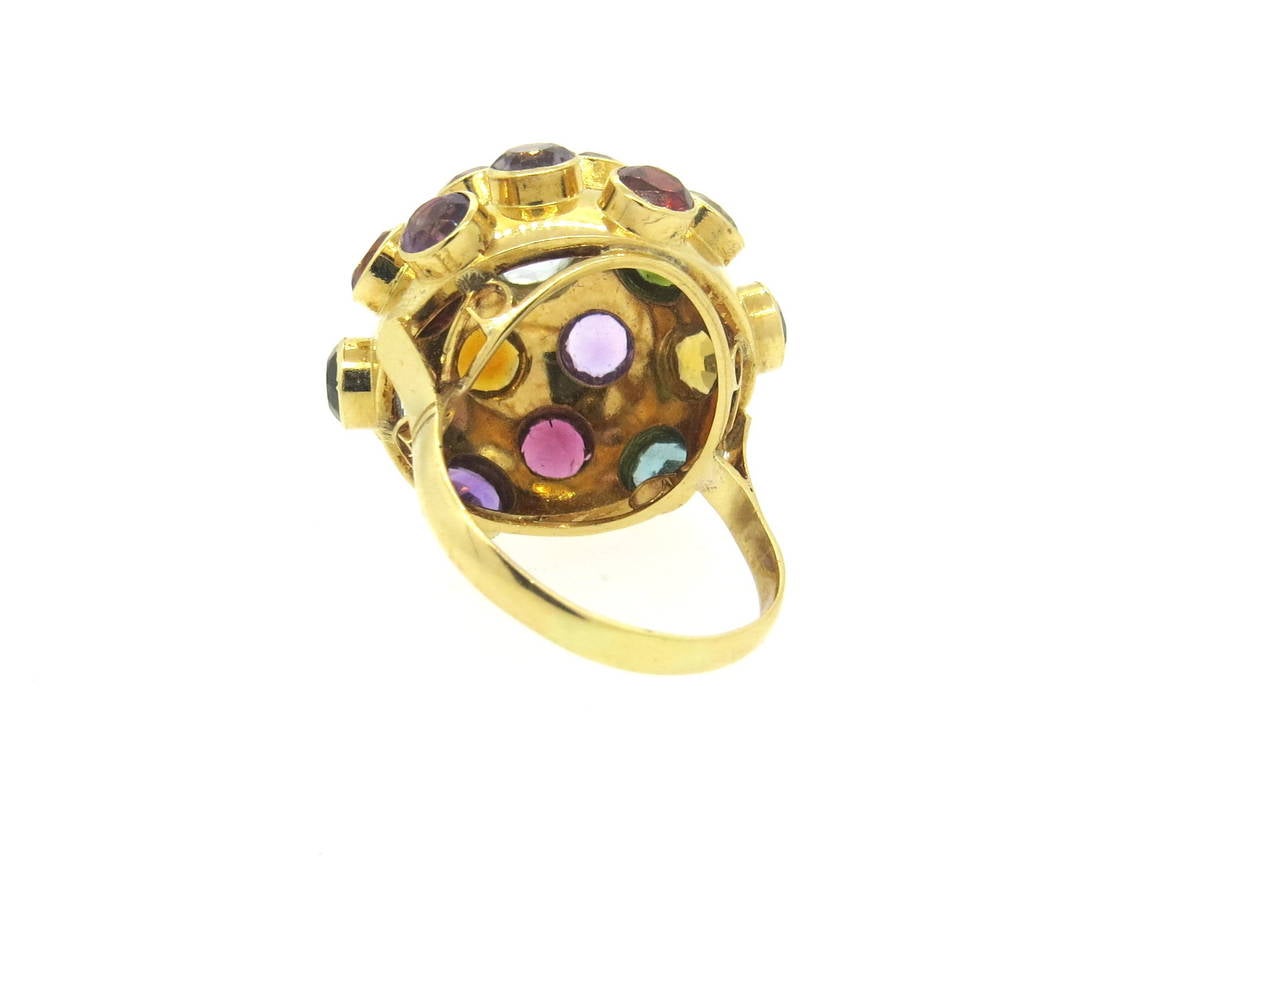 18k gold ring,featuring Sputnik design,  set with multicolor semi precious gemstones - including garnet, citrine, amethyst, tourmaline, peridot, aquamarine. Ring is a size 8 1/2, ring top is  24mm in diameter. Weight of the piece - 6.3 grams